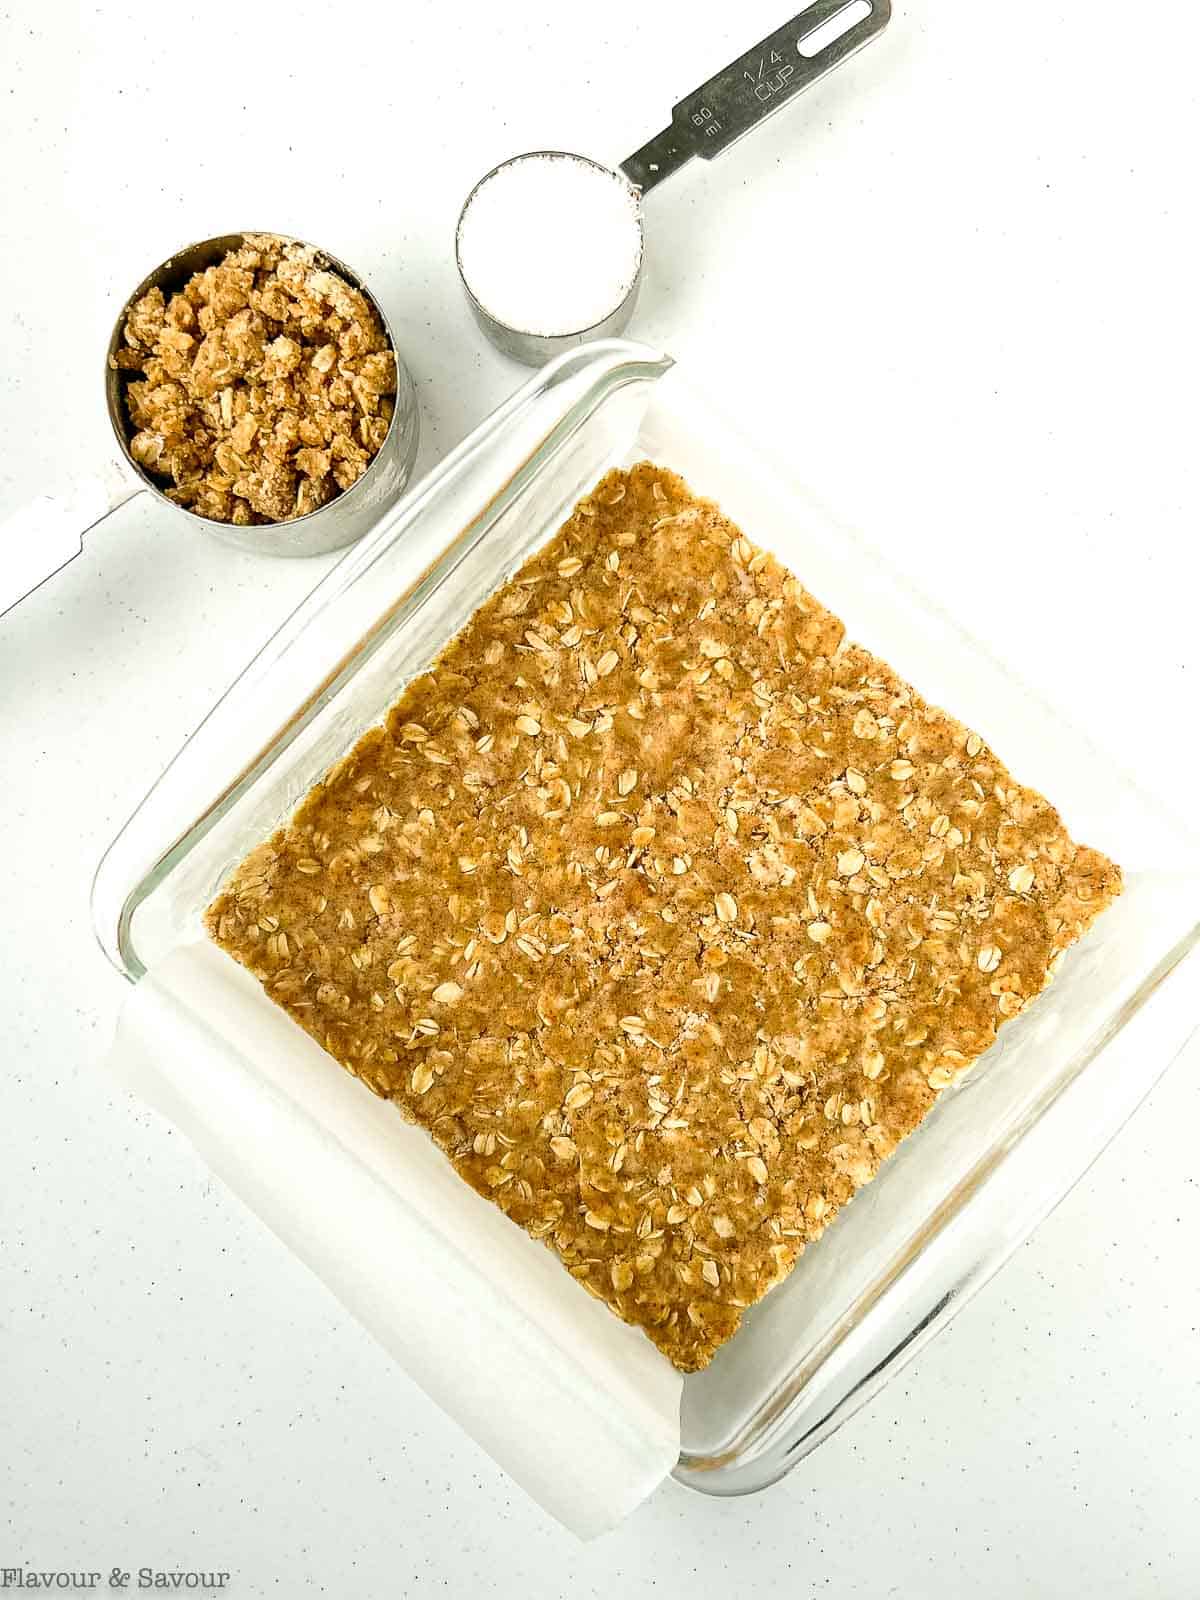 Oatmeal base pressed into a baking pan for cranberry bars.